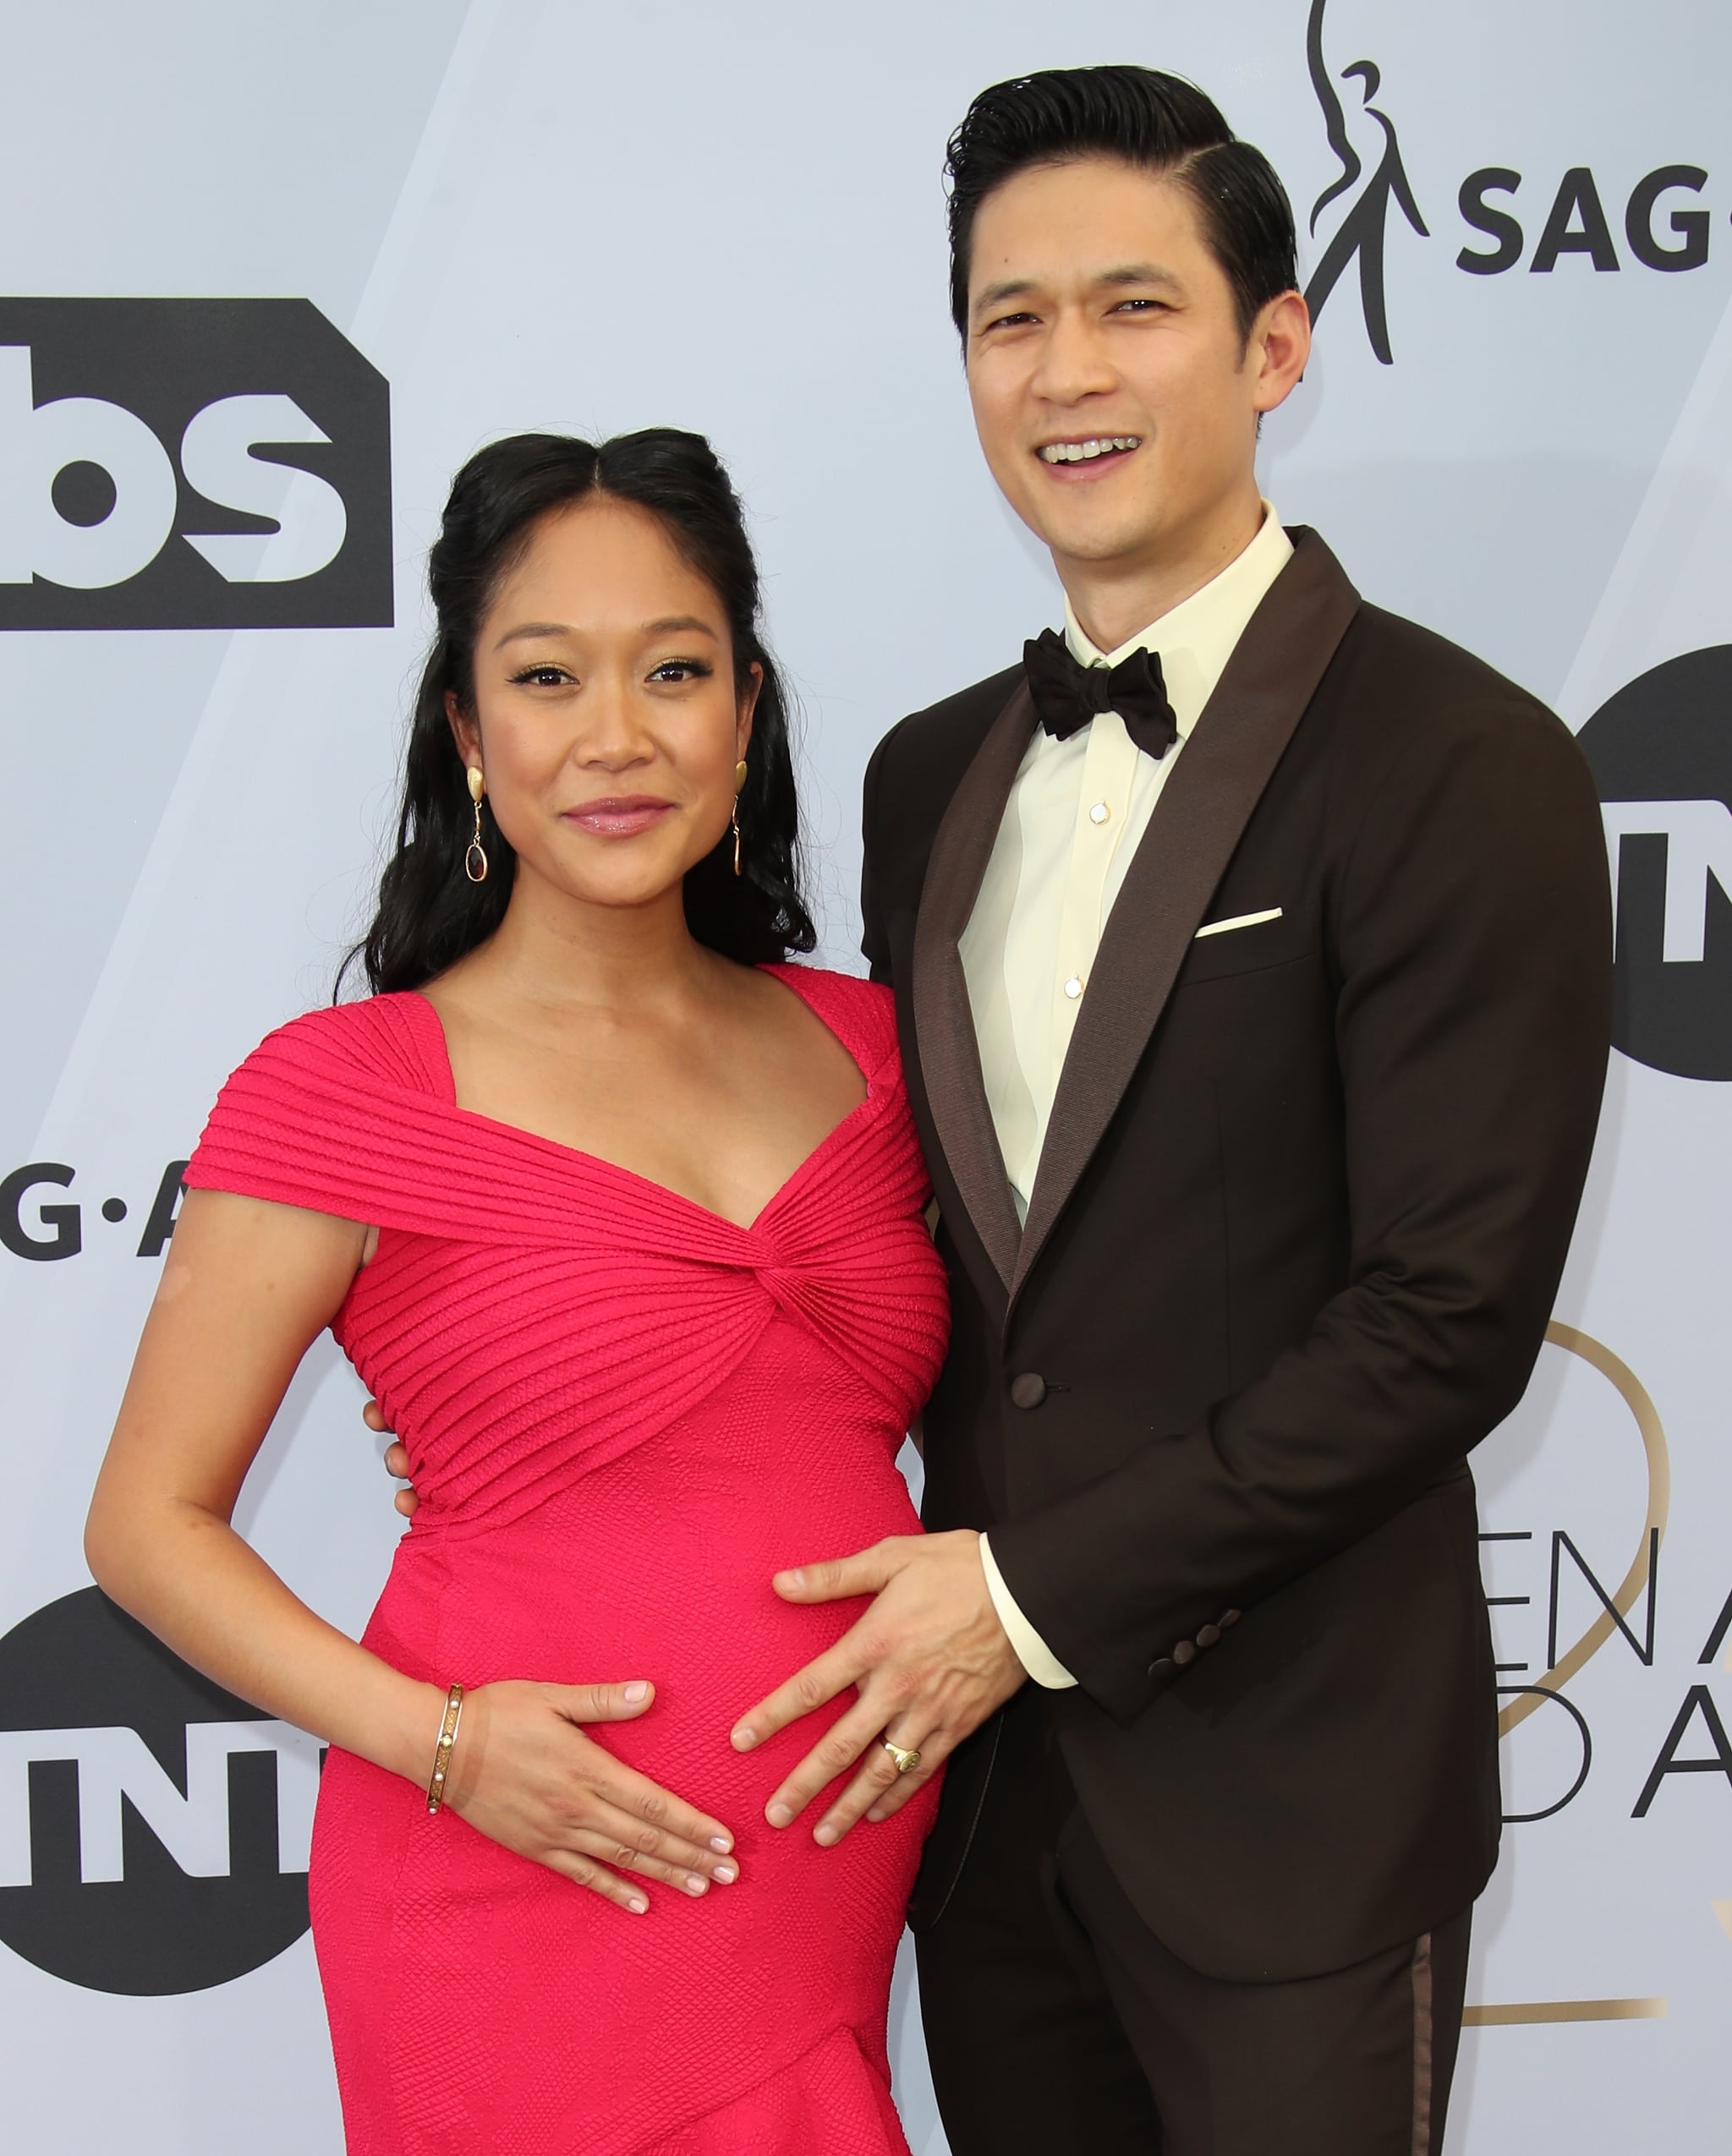 LOS ANGELES, CA - JANUARY 27: (L-R) Shelby Rabara and Harry Shum Jr. attend the 25th Annual Screen Actors Guild Awards at The Shrine Auditorium on January 27, 2019 in Los Angeles, California. (Photo by Dan MacMedan/Getty Images)